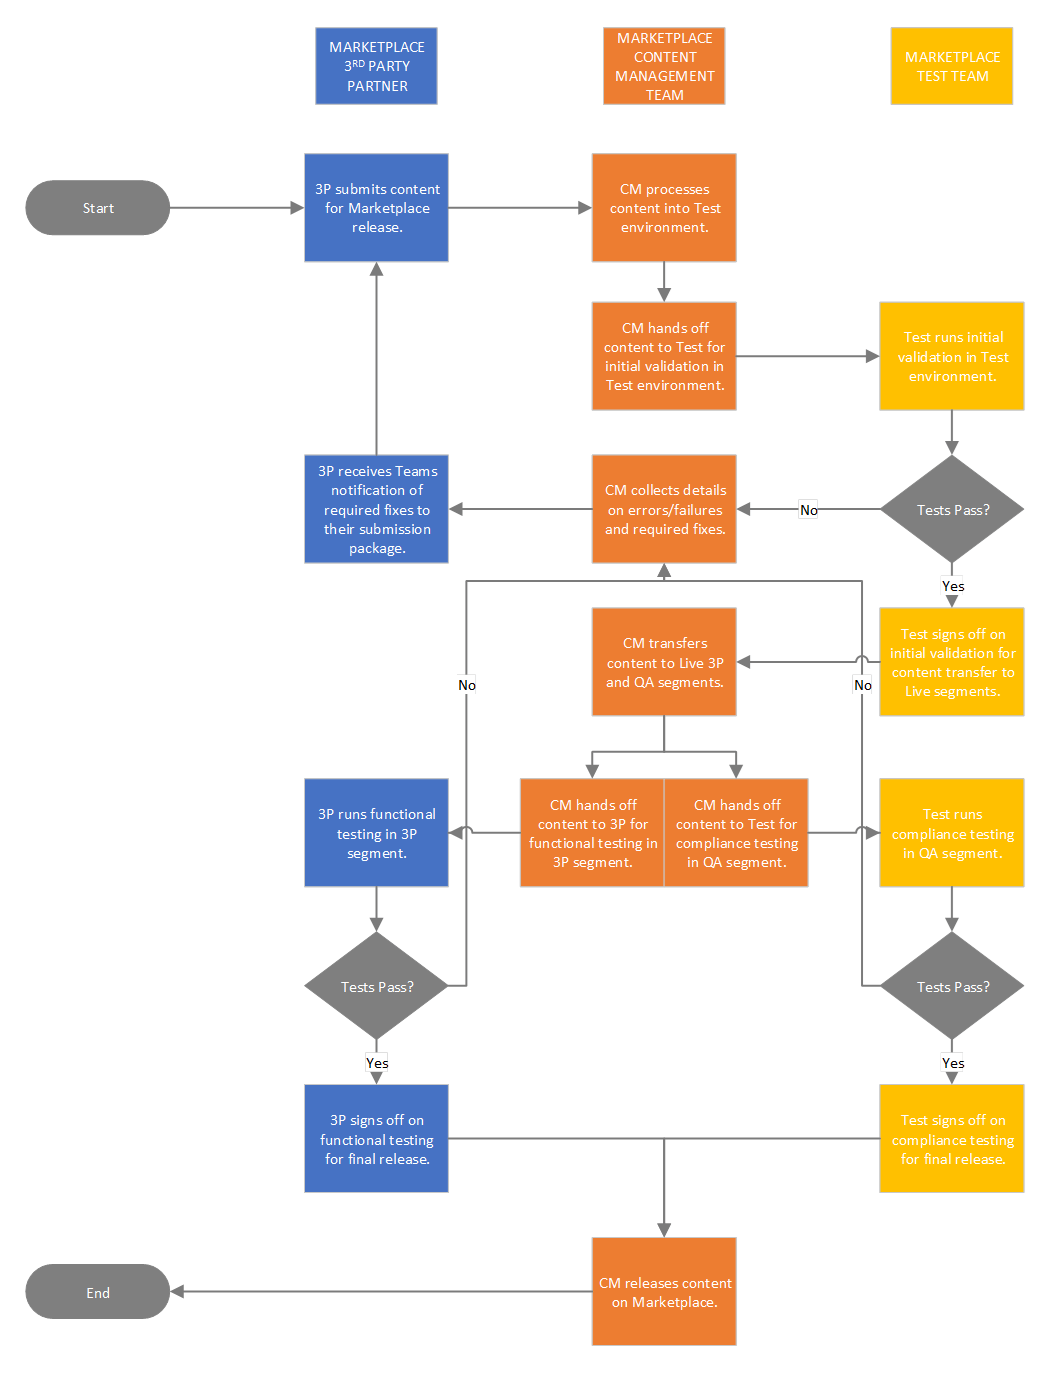 A process flow chart for Marketplace submissions and approvals. There are three process owners: Marketplace 3rd Party Partner, Marketplace Content Management Team, and Marketplace Test Team. Each process owner has a variety of tasks to complete and sign-off before new products are released to the Marketplace.